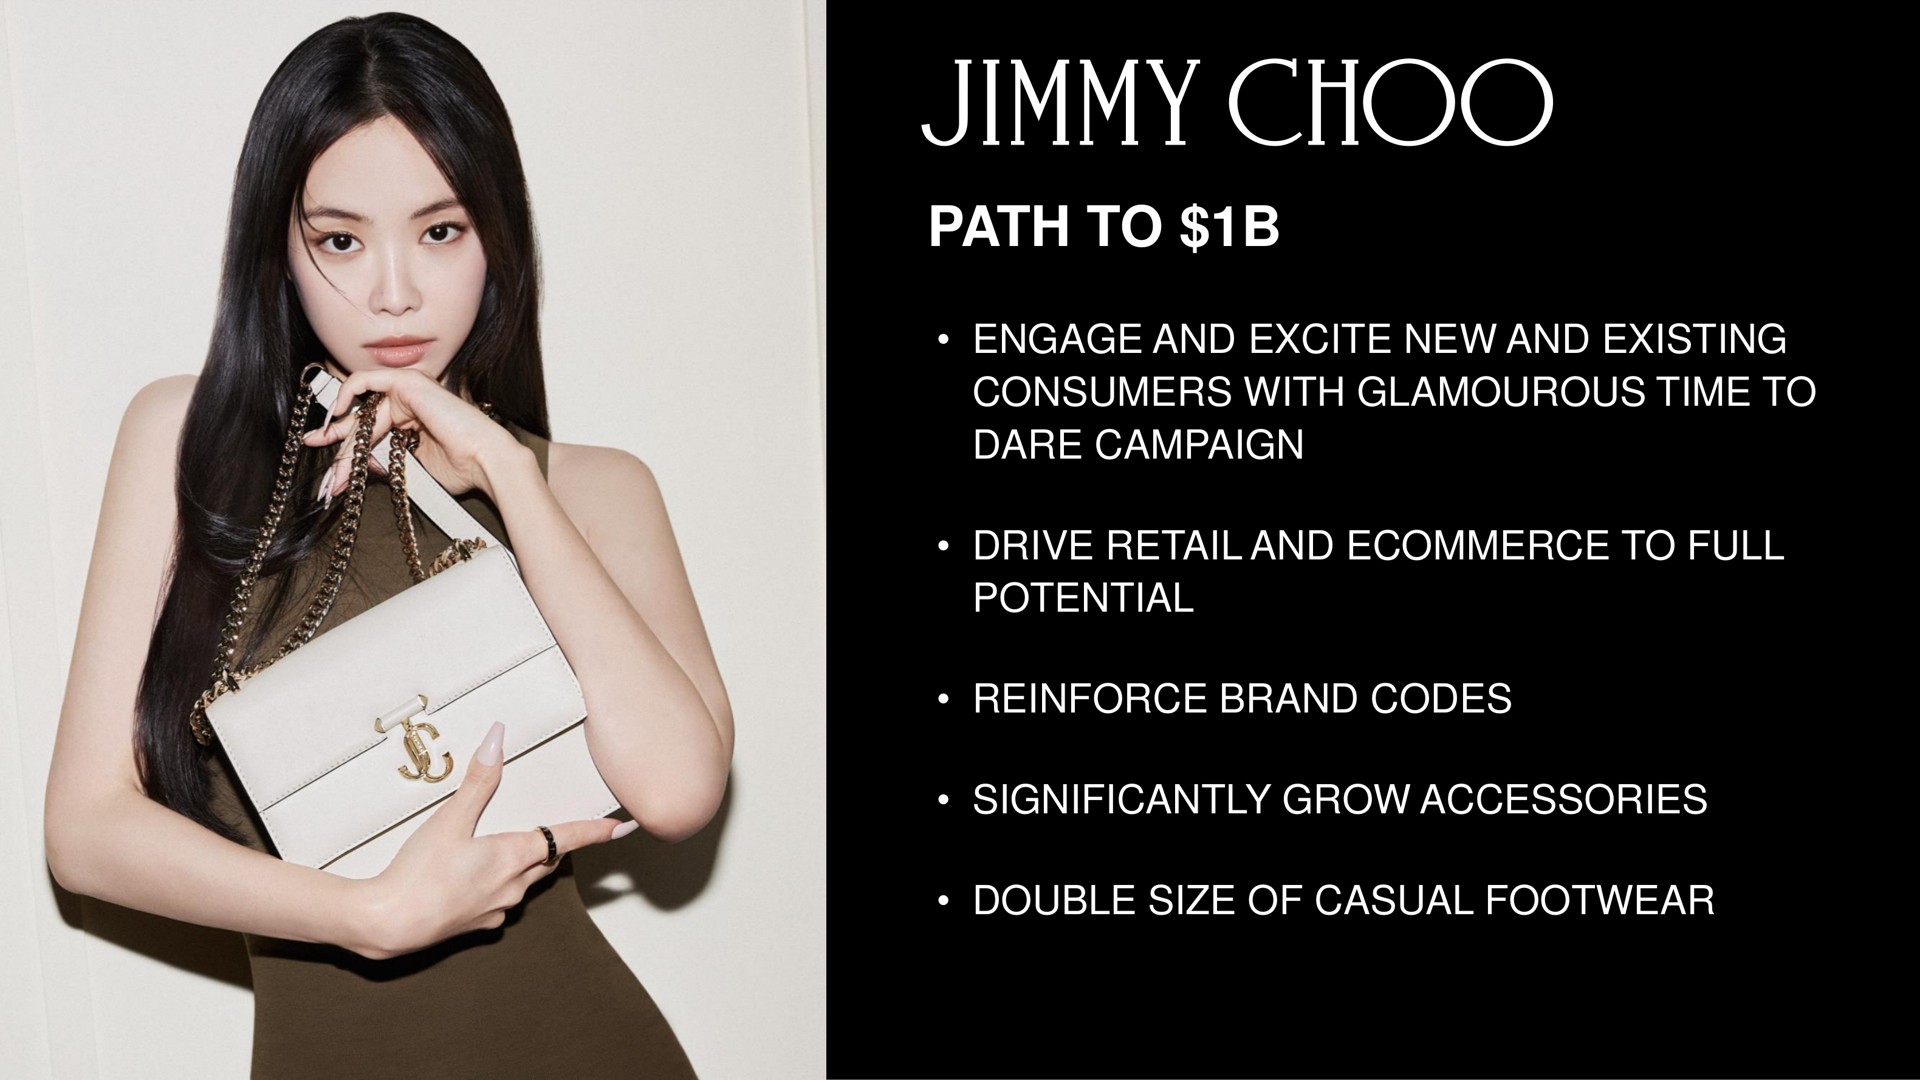 jimmy path to engage and excite new and existing consumers with time to dare campaign drive to full potential reinforce brand codes significantly grow accessories double size of casual footwear | Capri Holdings